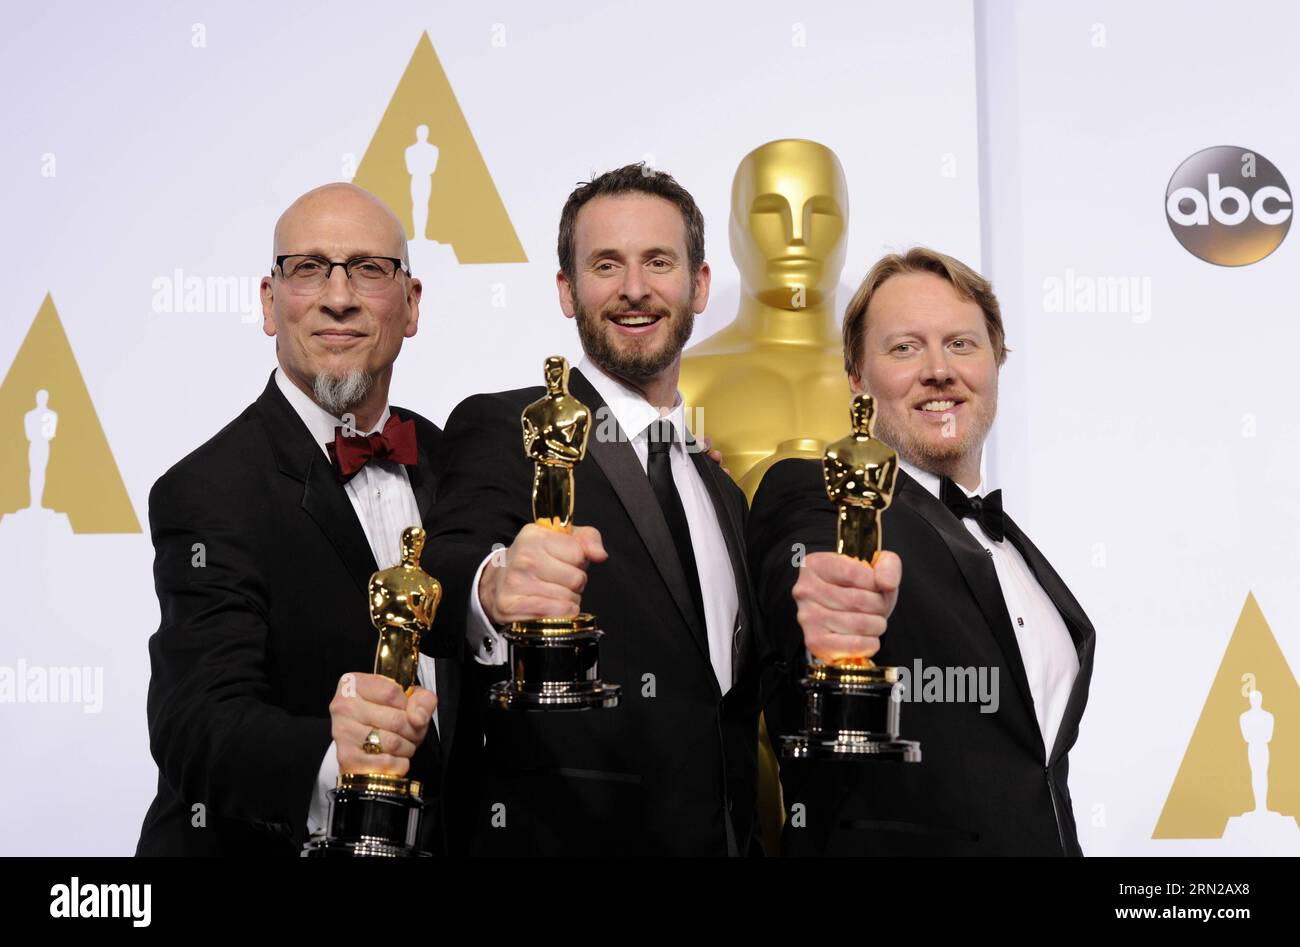 (150223) -- LOS ANGELES, Feb. 22, 2015 -- Directors Don Hall (R), Chris Williams (C) and Roy Conli pose after winning the Best Animated Feature Film award for Big Hero 6 during the 87th Academy Awards at the Dolby Theater in Los Angeles, the United States, on Feb. 22, 2015. )(bxq) US-LOS ANGELES-OSCARS-BEST ANIMATED FEATURE FILM YangxLei PUBLICATIONxNOTxINxCHN   Los Angeles Feb 22 2015 Directors Don Hall r Chris Williams C and Roy  Pose After Winning The Best Animated Feature Film Award for Big Hero 6 during The 87th Academy Awards AT The Dolby Theatre in Los Angeles The United States ON Feb 2 Stock Photo